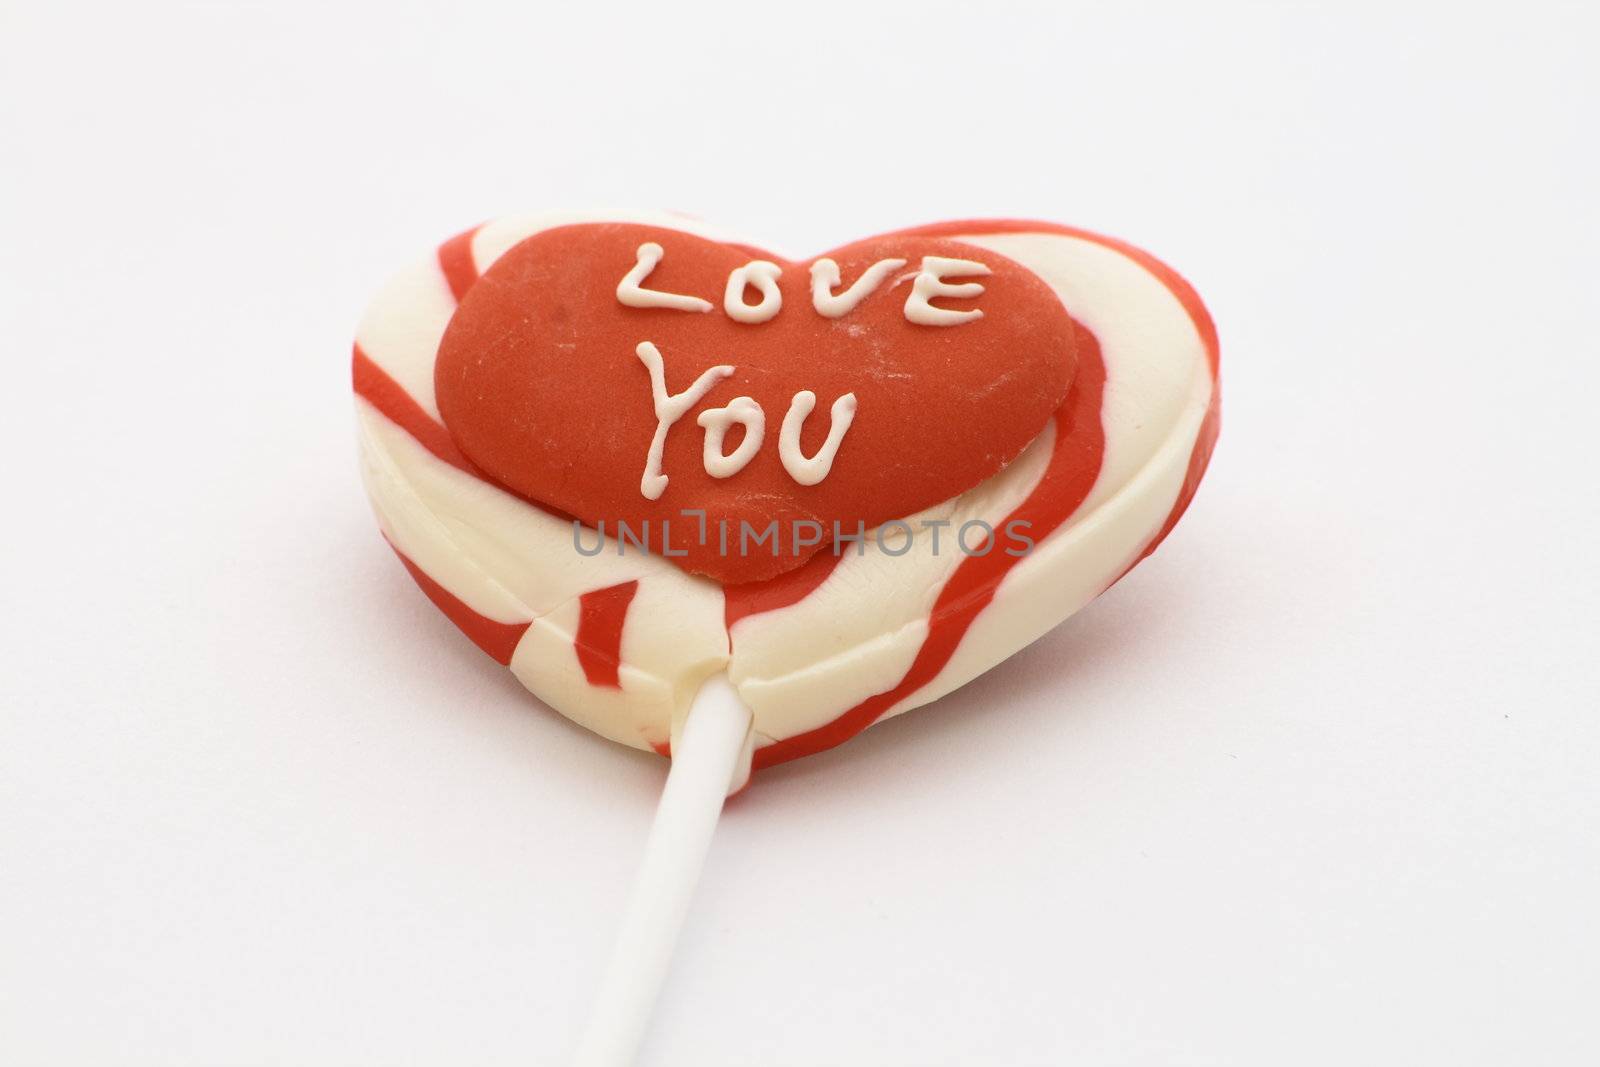 love you candy lolly  by leafy